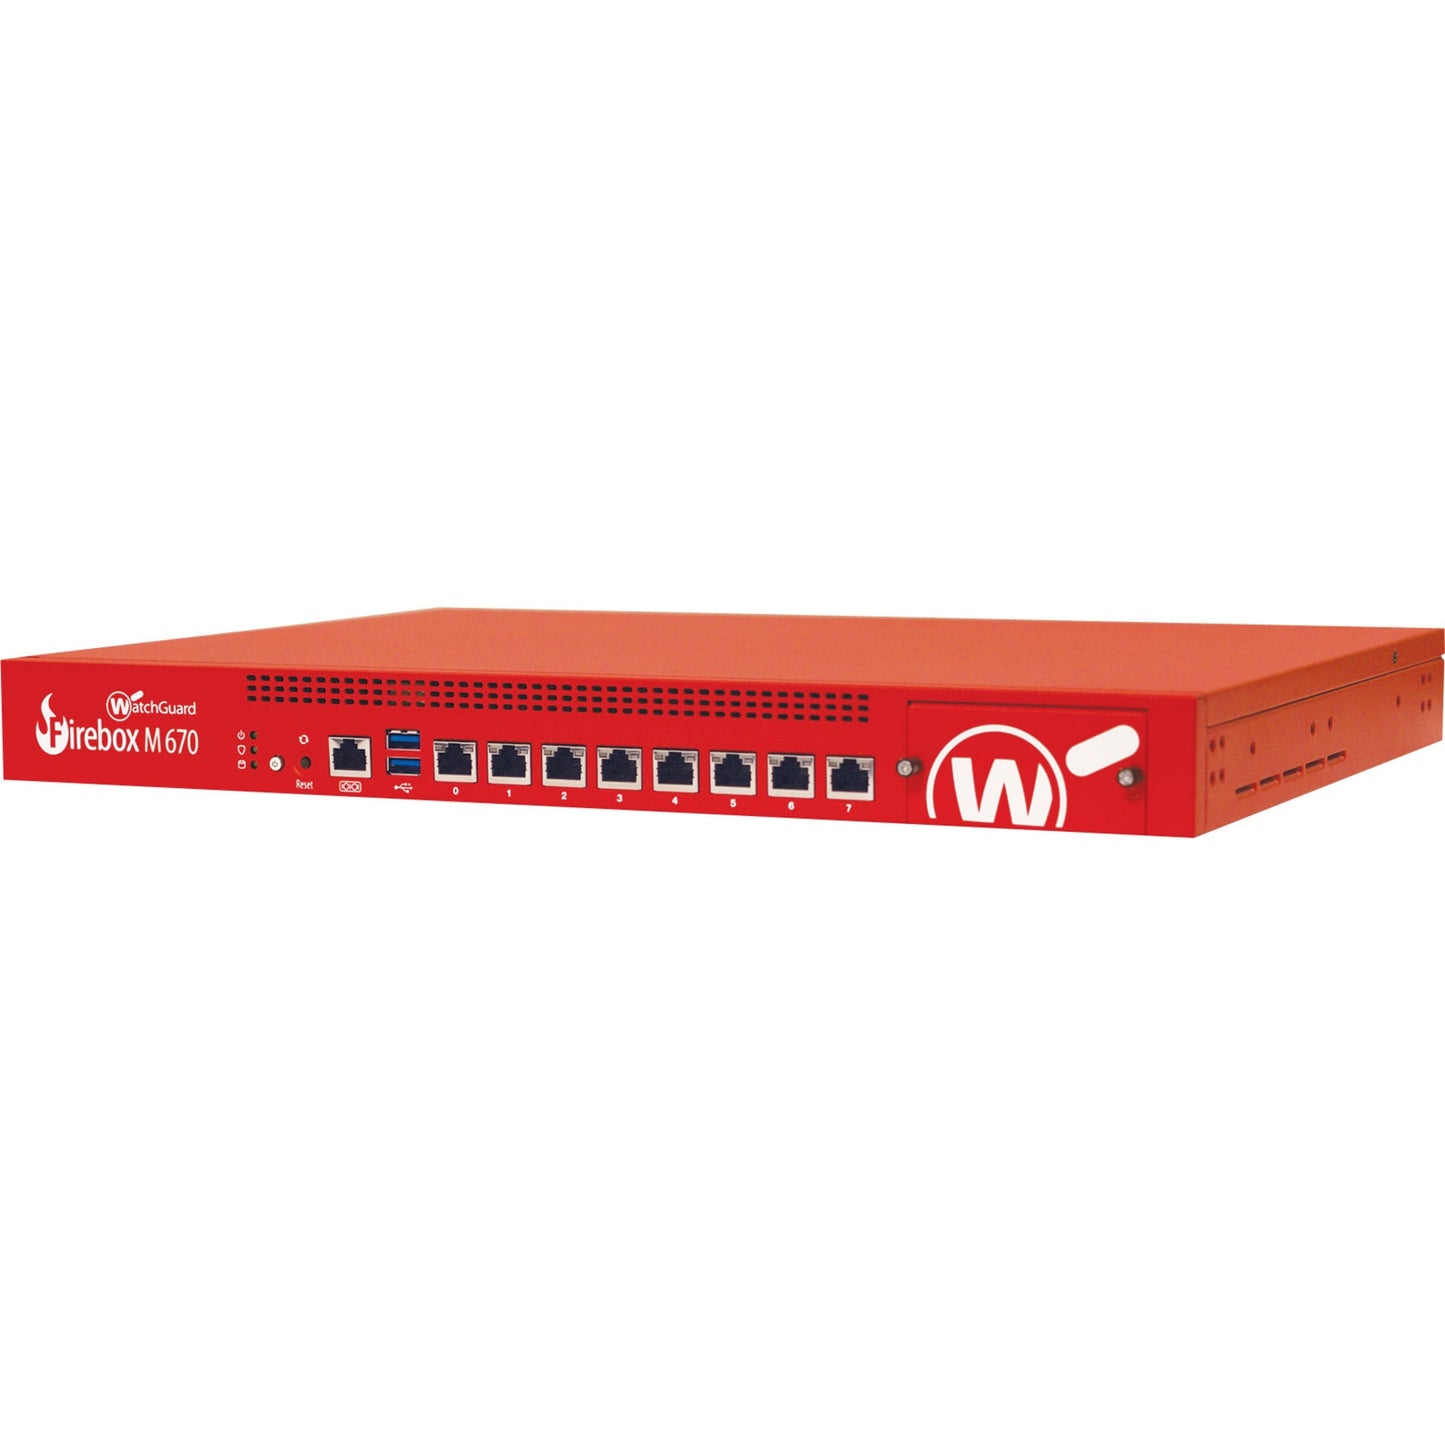 Trade up to WatchGuard Firebox M670 with 3-yr Basic Security Suite